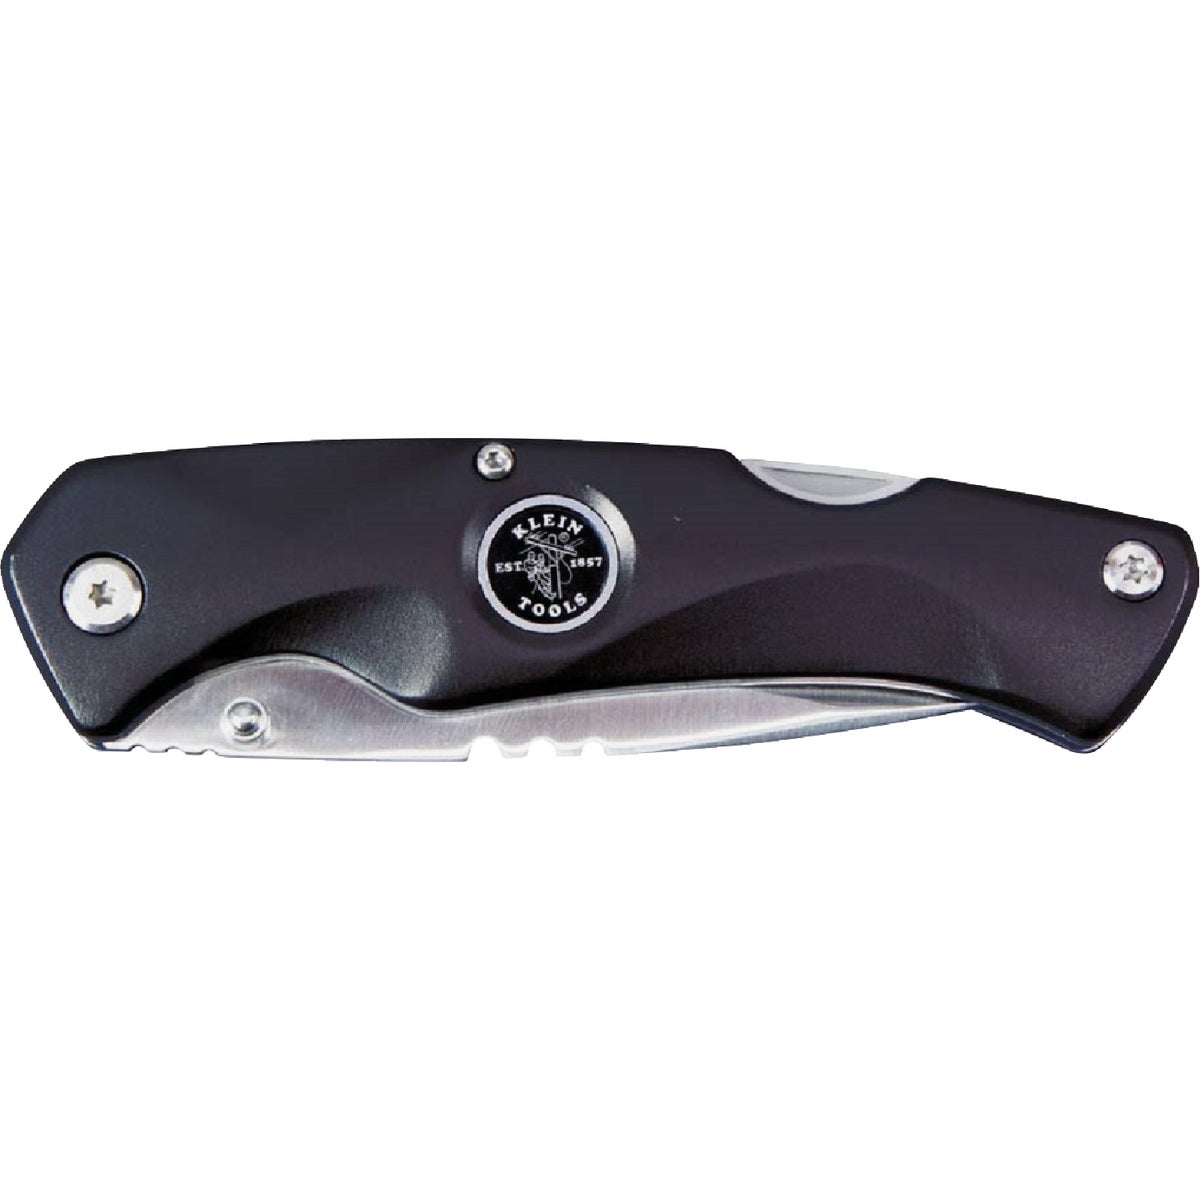 Klein 3-3/8 In. Electrician's Stainless Steel Folding Pocket Knife with #2 Phillips Driver